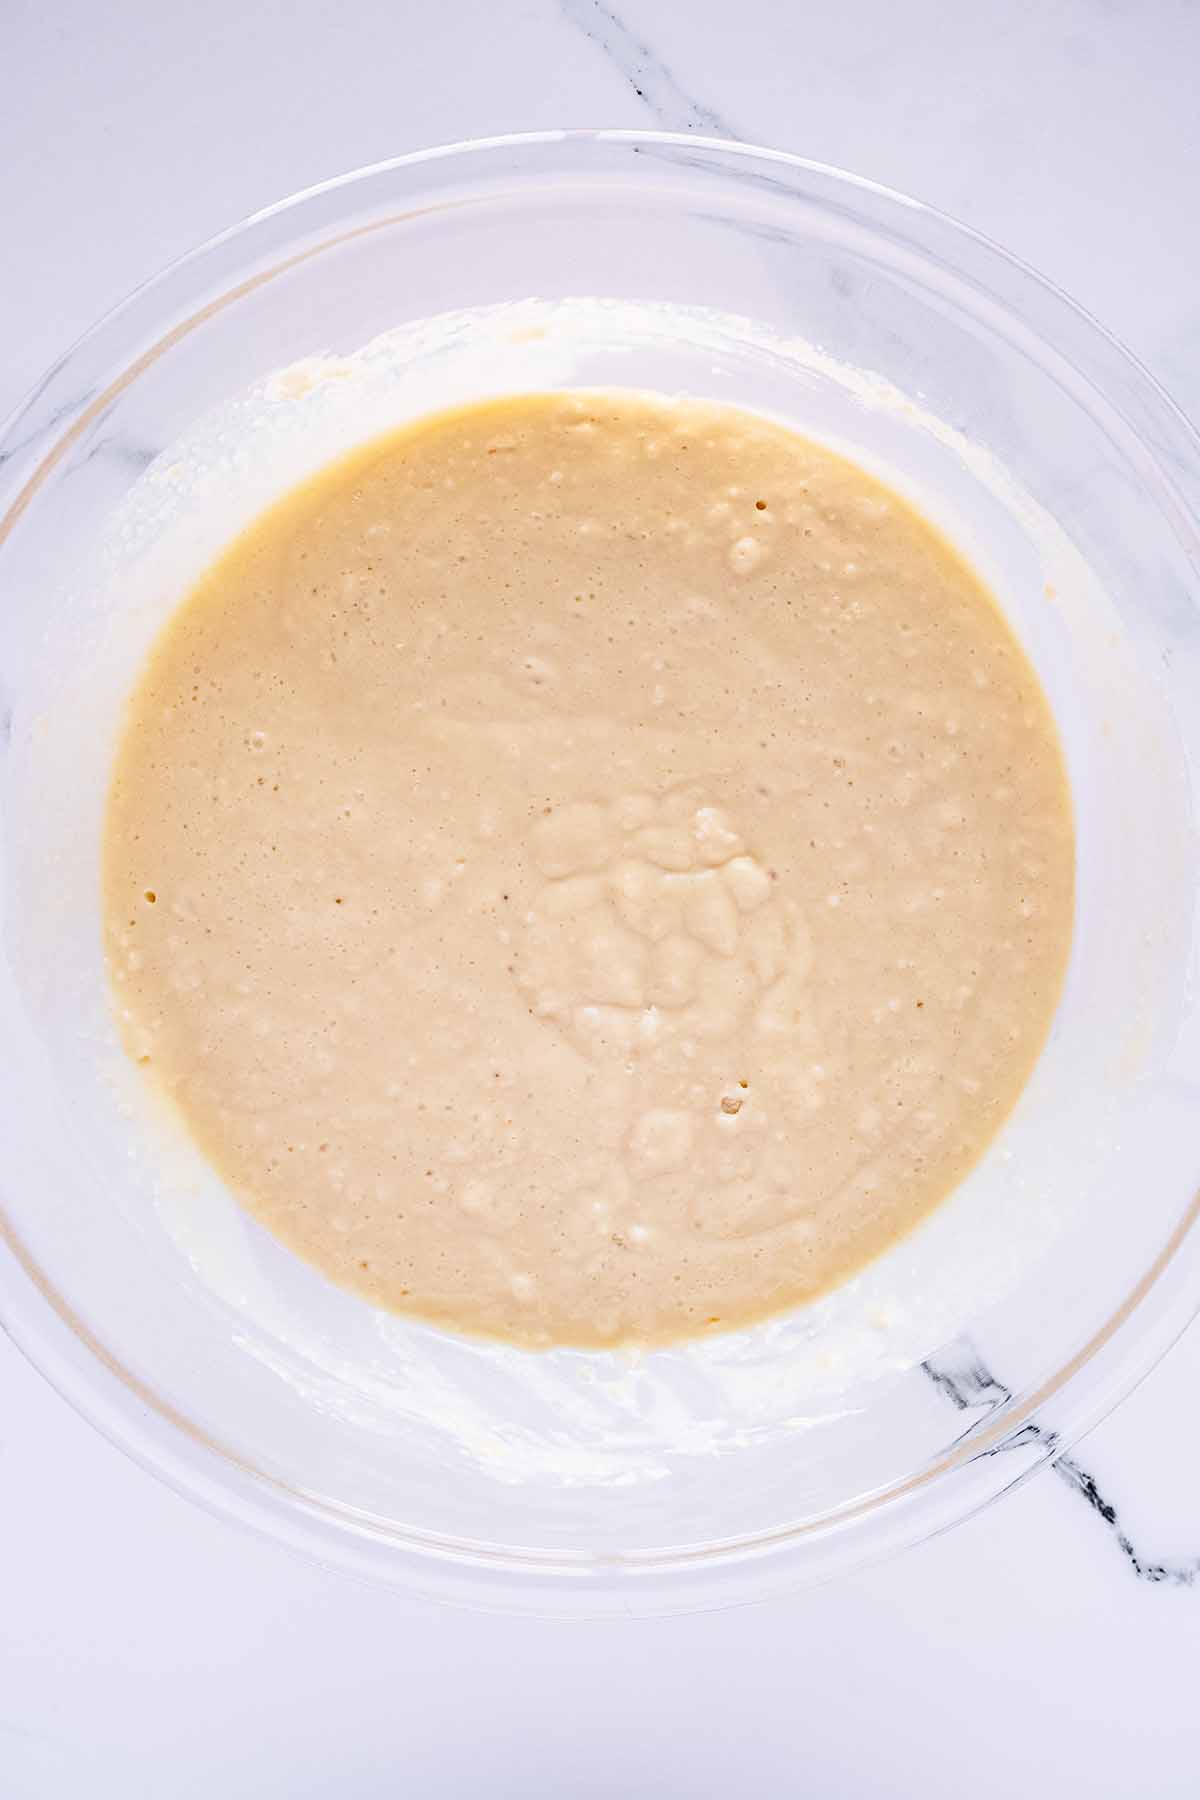 Overhead view of batter in a glass bowl